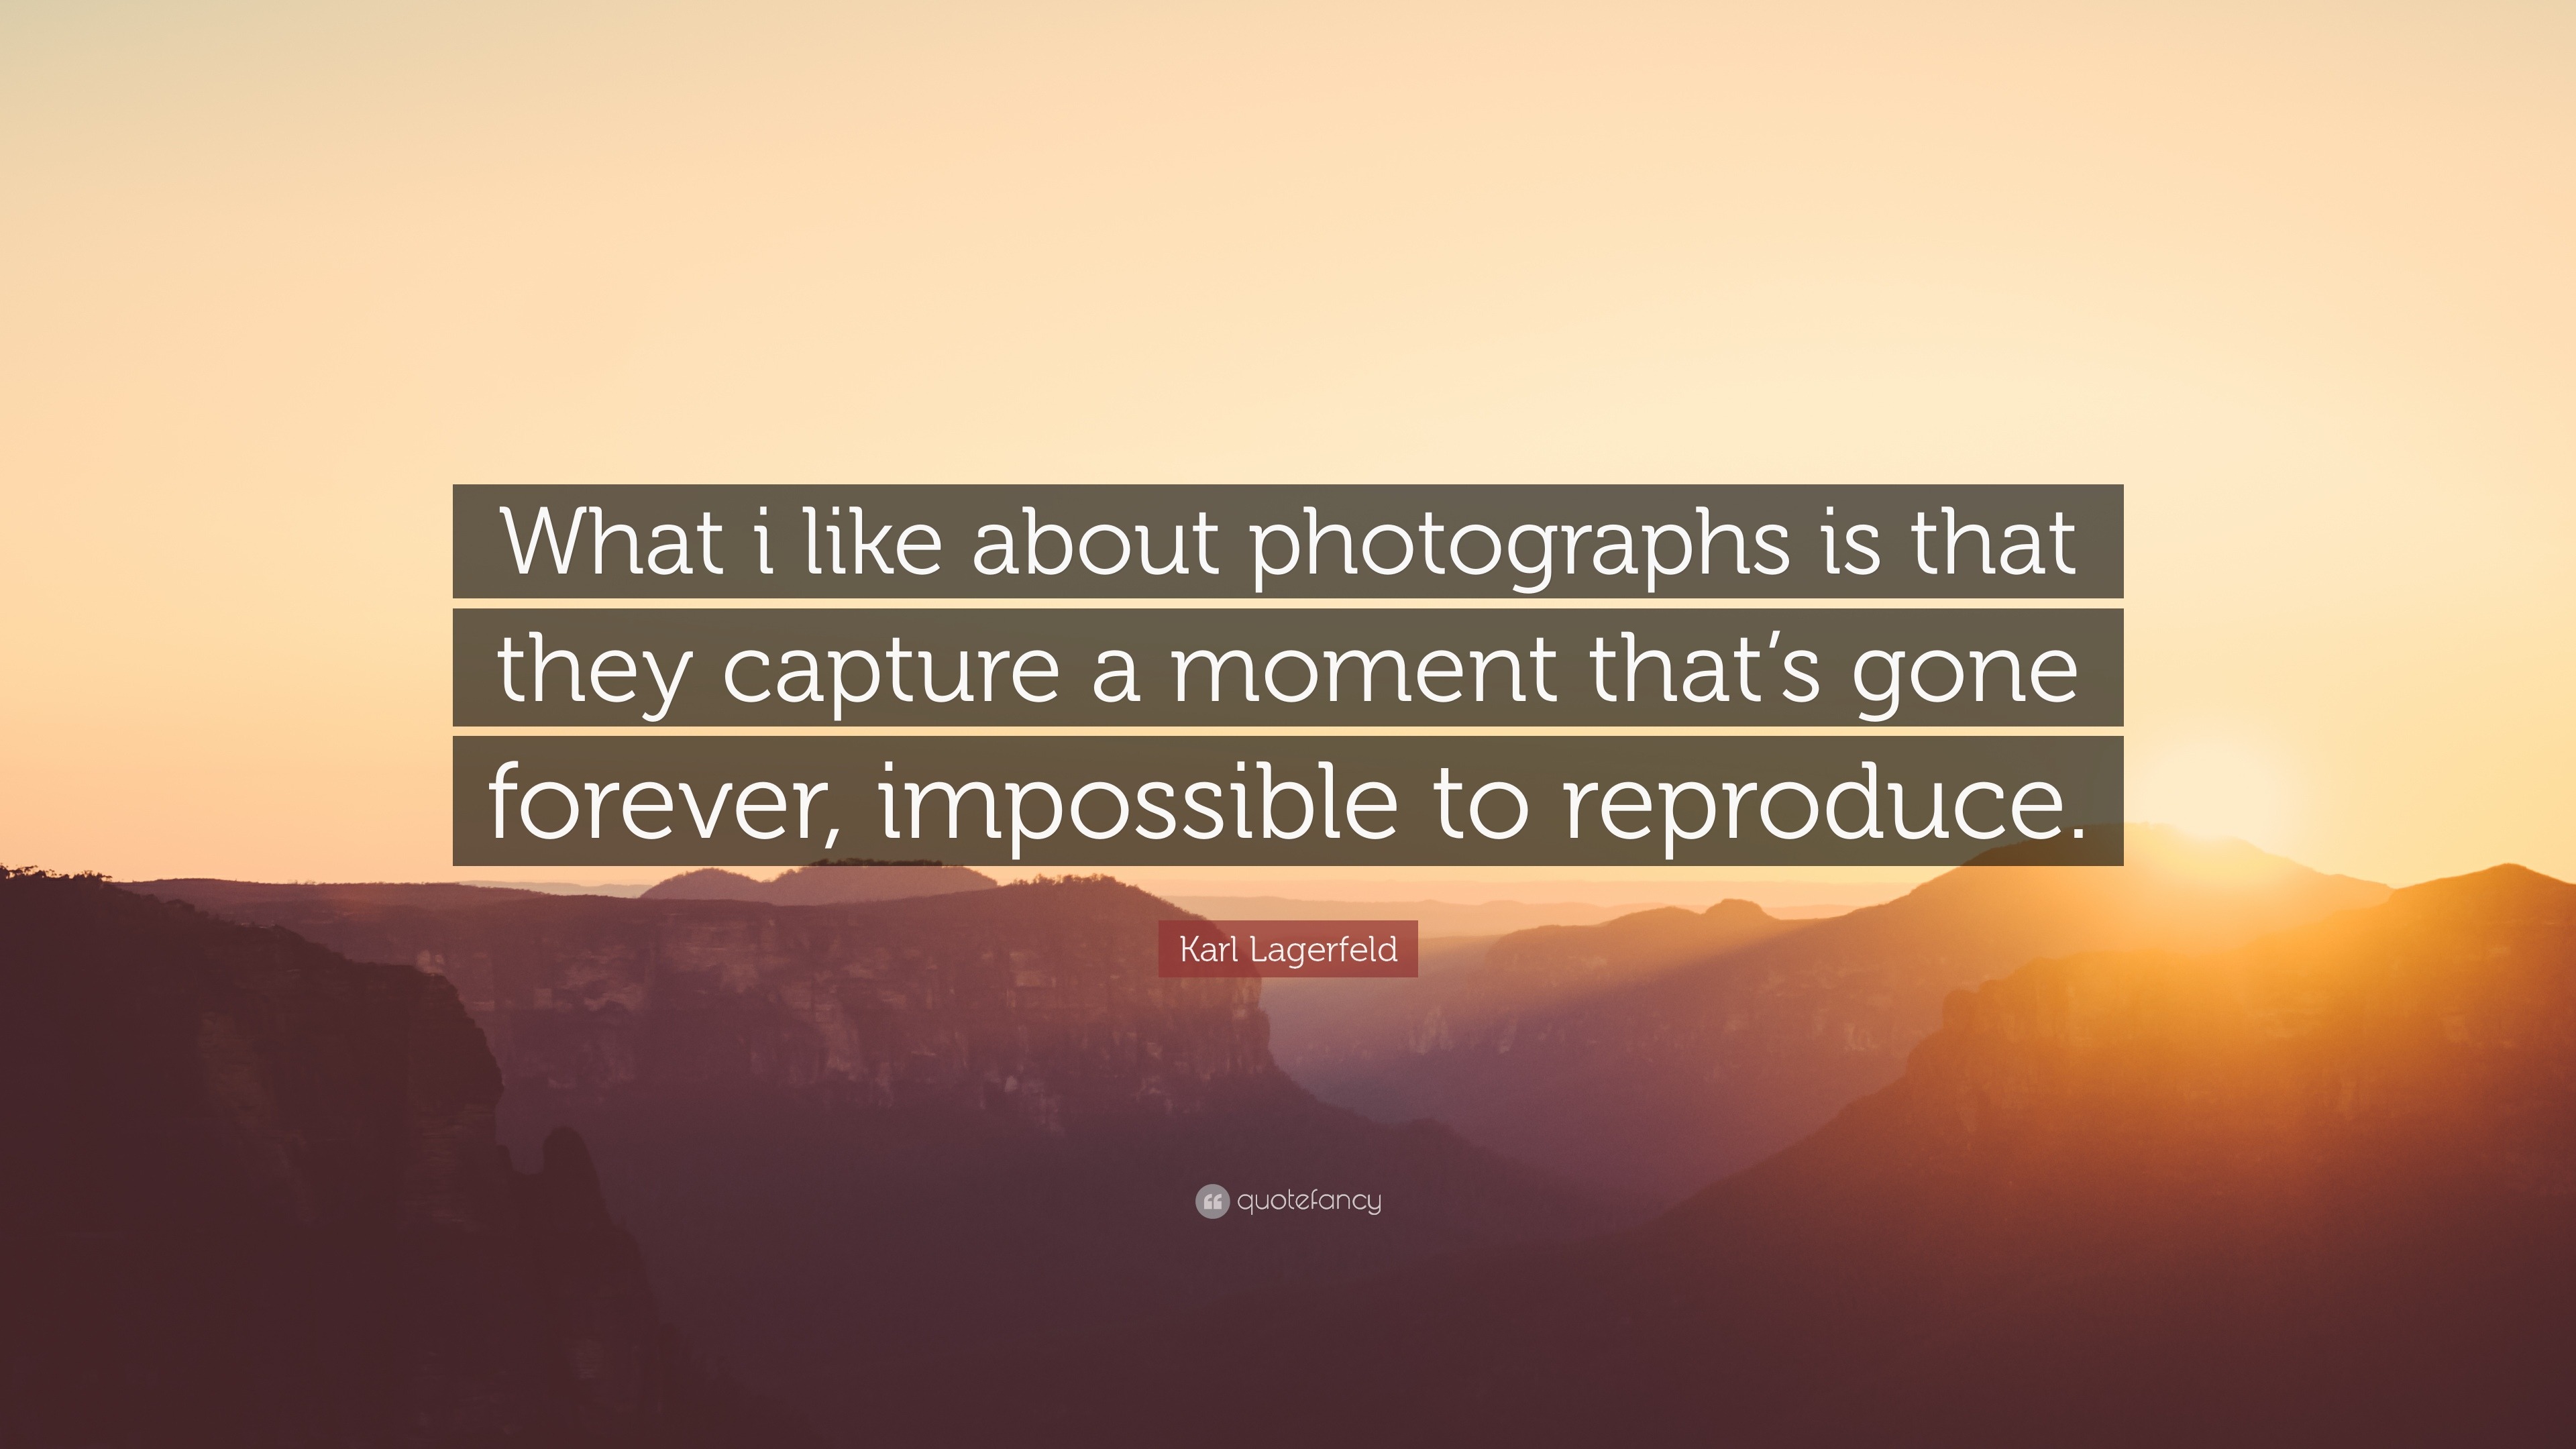 Karl Lagerfeld Quote: “What i like about photographs is that they